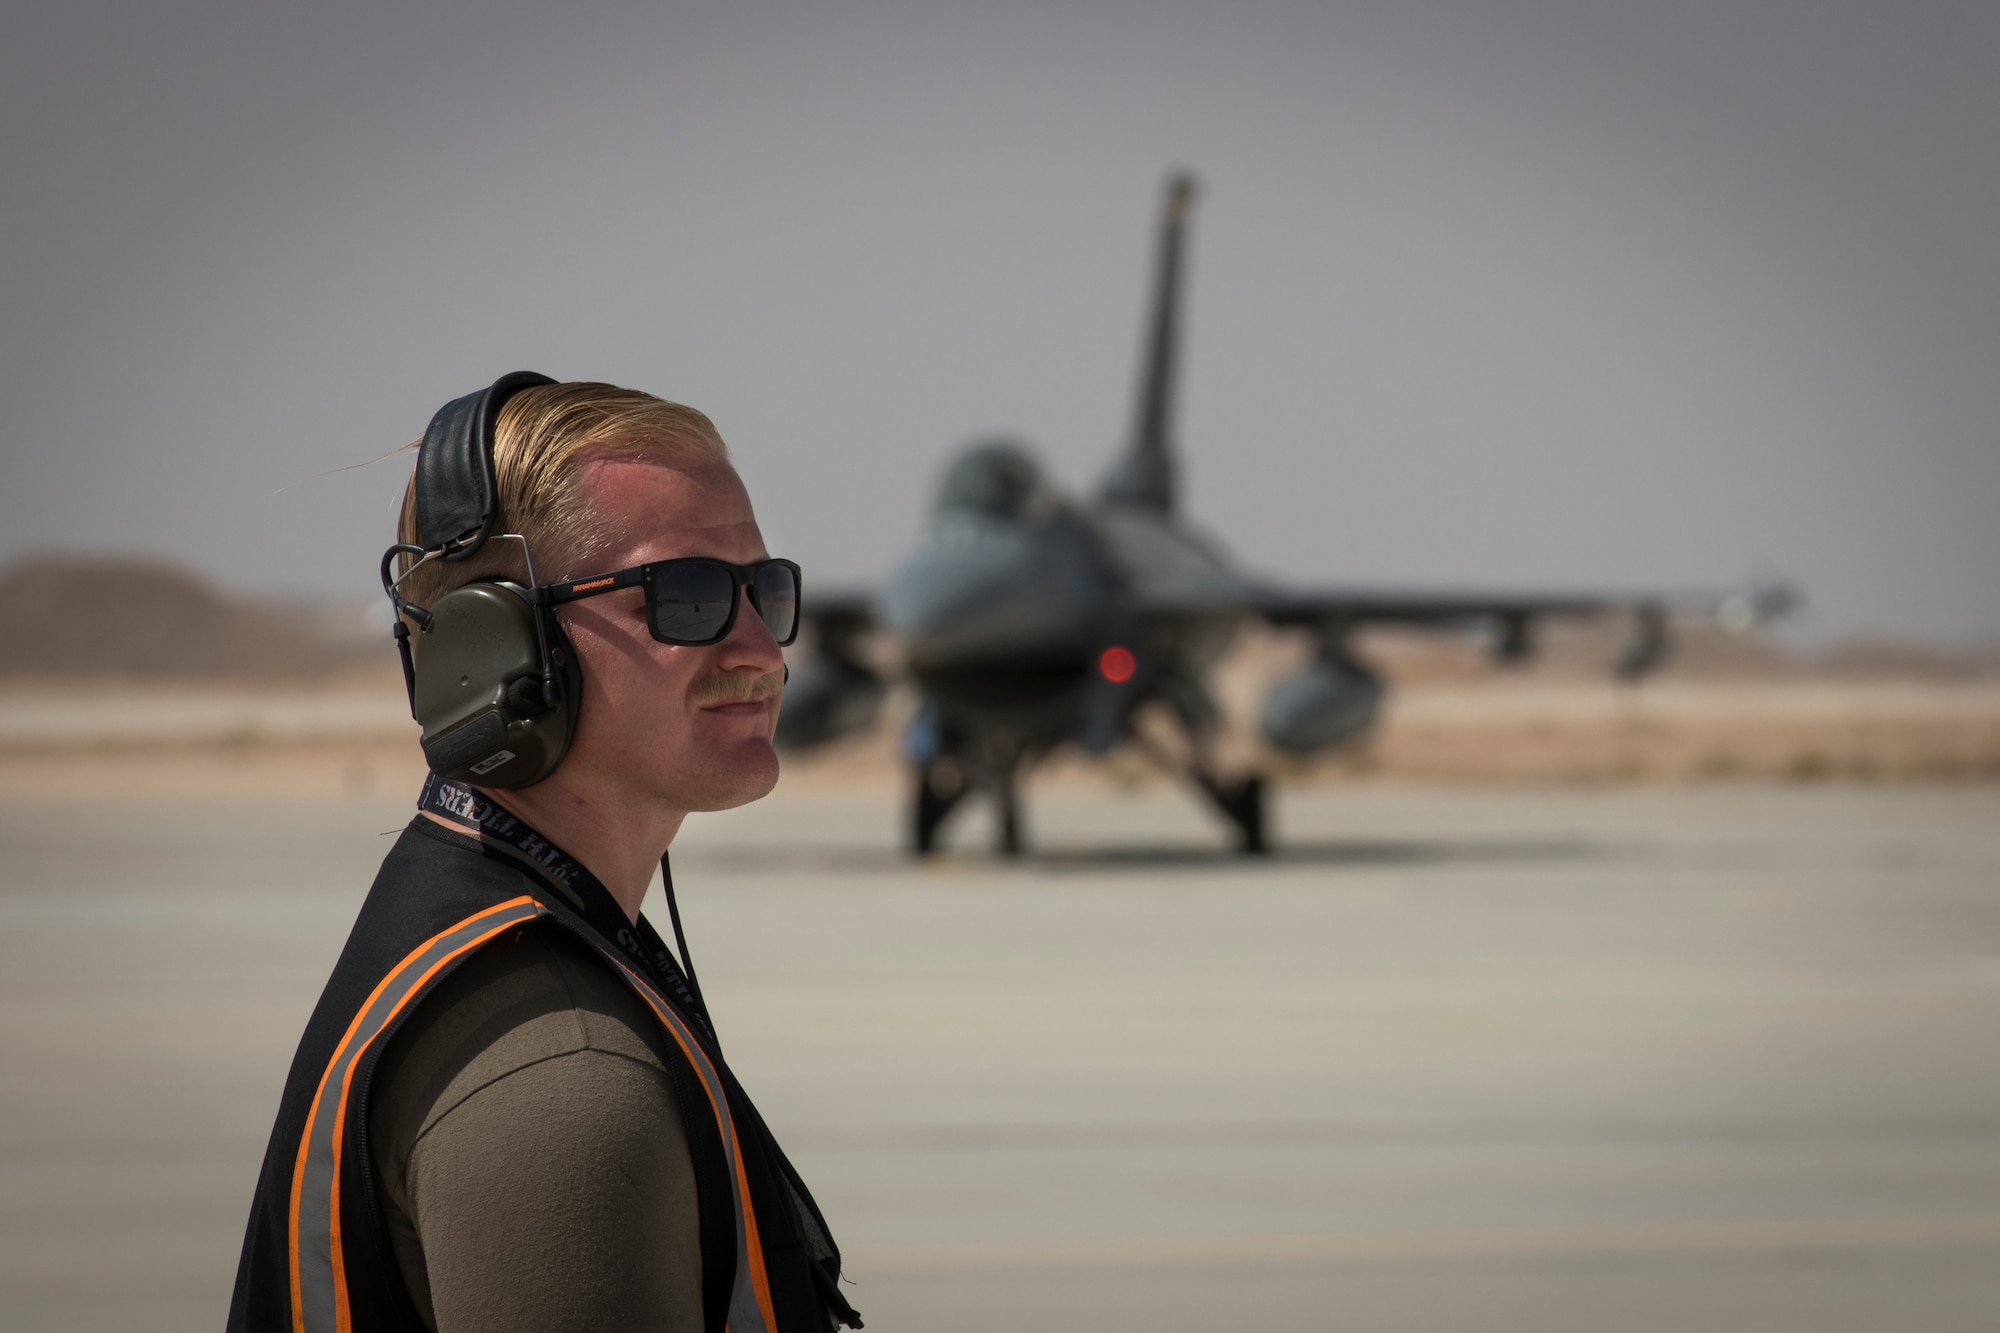 U.S Air Force Staff Sgt. David Williams, a crew chief with the 380th Expeditionary Aircraft Maintenance Squadron prepares to marshal a U.S. Air Force F-16 “Viper” Fighting Falcon assigned to the 79th Expeditionary Fighter Squadron at an undisclosed location in the U.S. Central Command area of responsibility, Feb. 14, 2020.